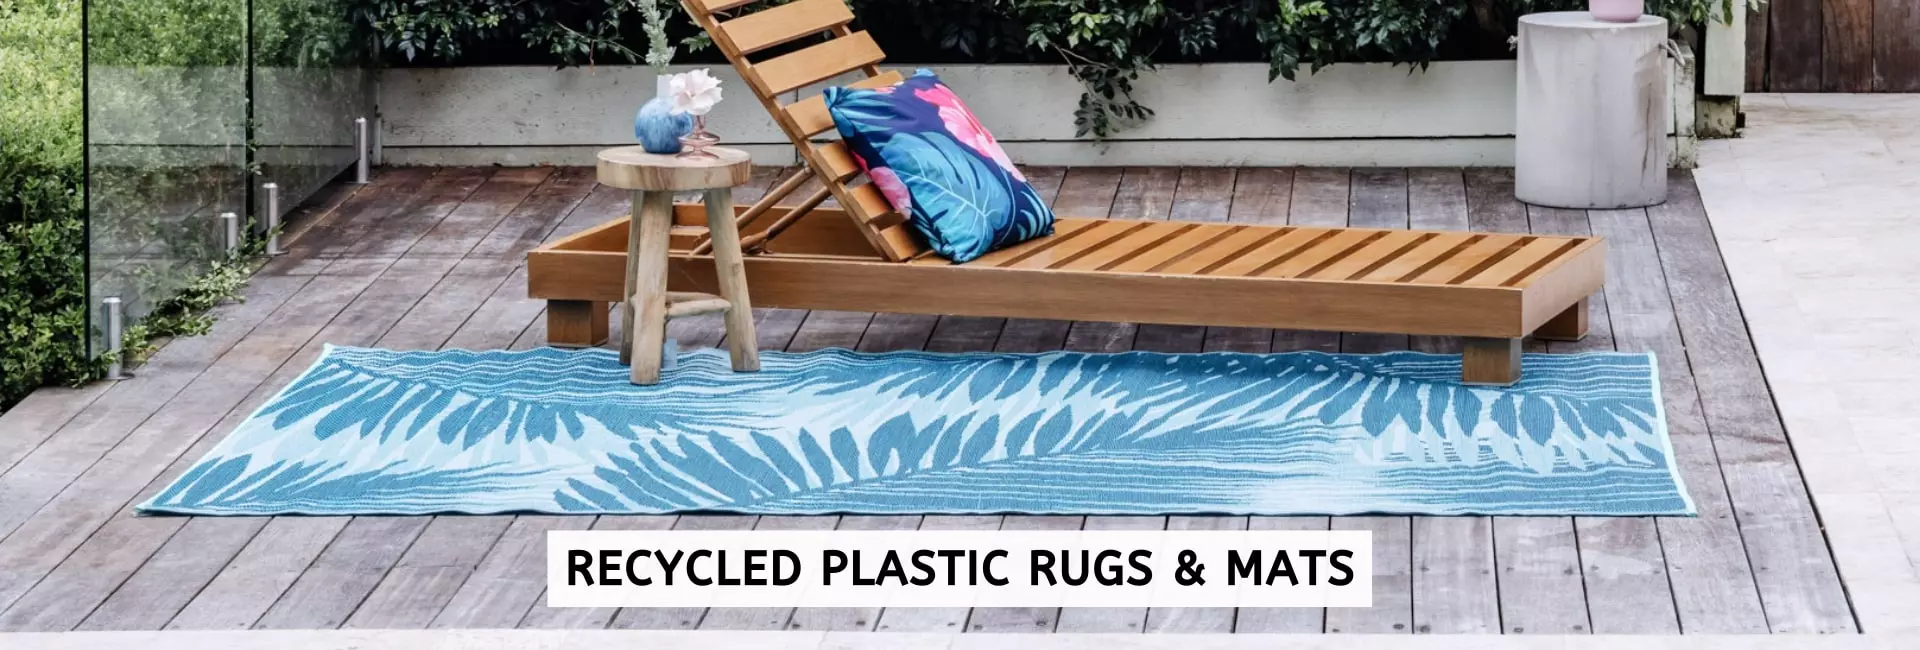 Recycled Plastic Rugs & Mats